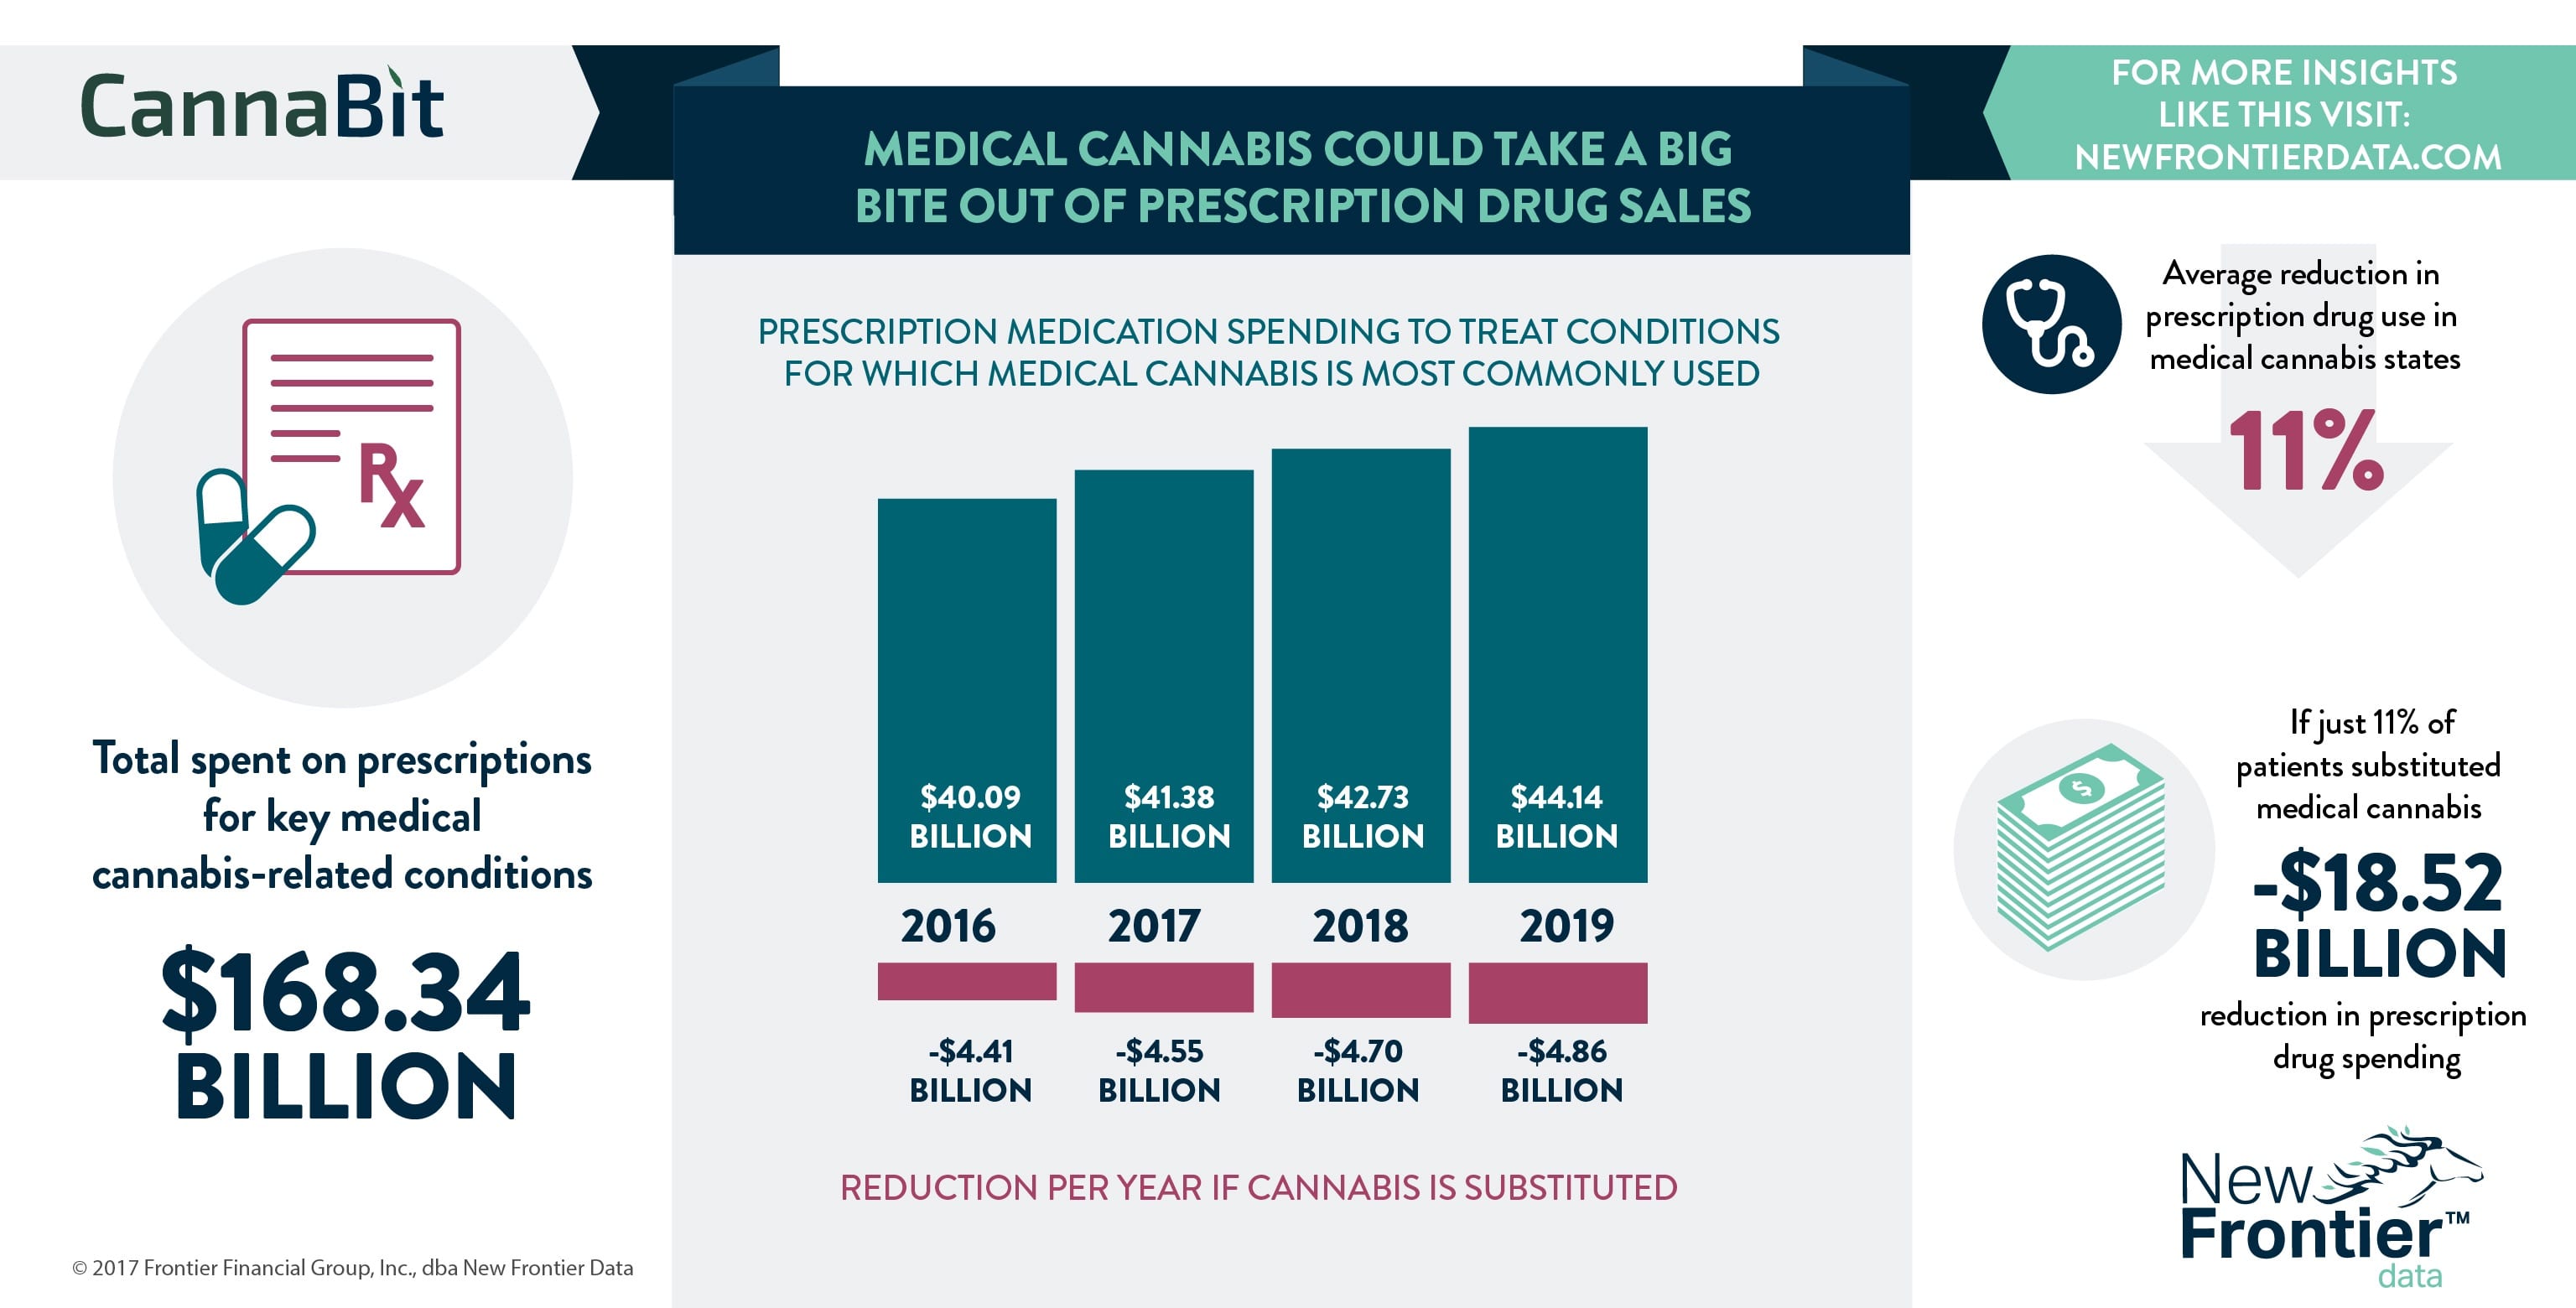 Cannabit: Medical Cannabis Could Take a Big Bite Out of Pharmaceutical Sales/ 05212017